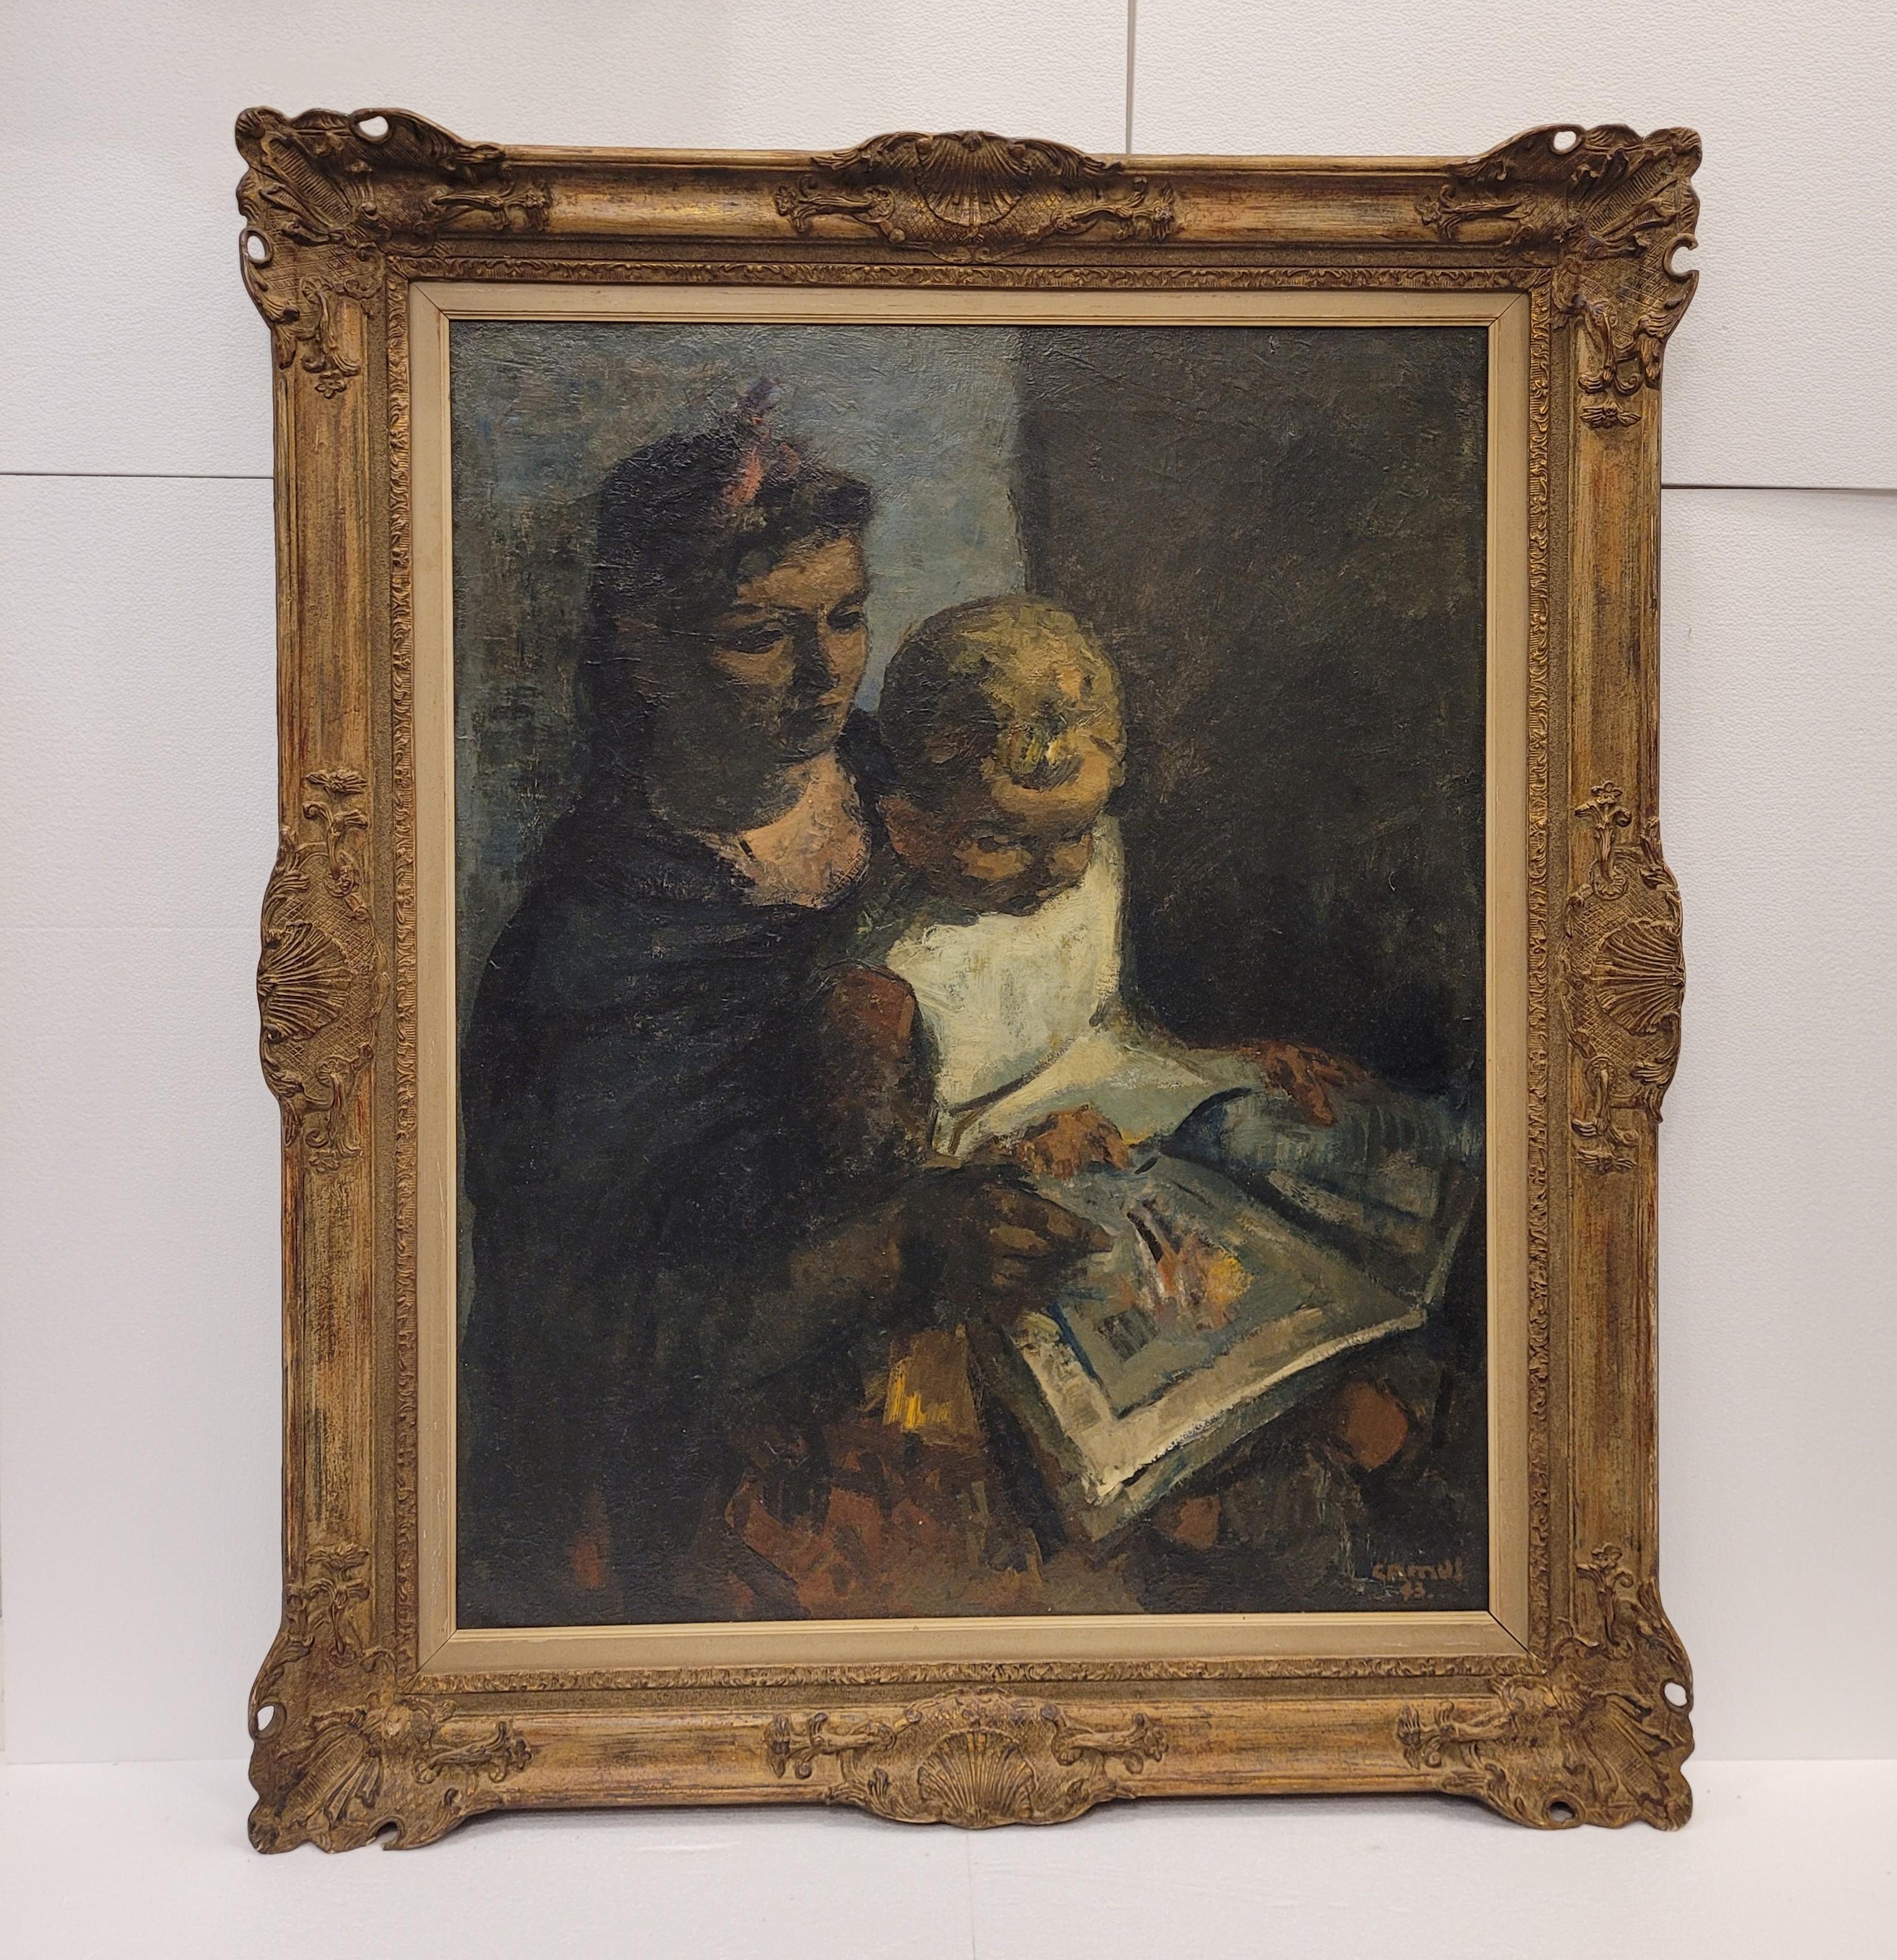 Expressionist Belgian expressionist painting “Teaching to read”, Gustave Camus, 43 signed